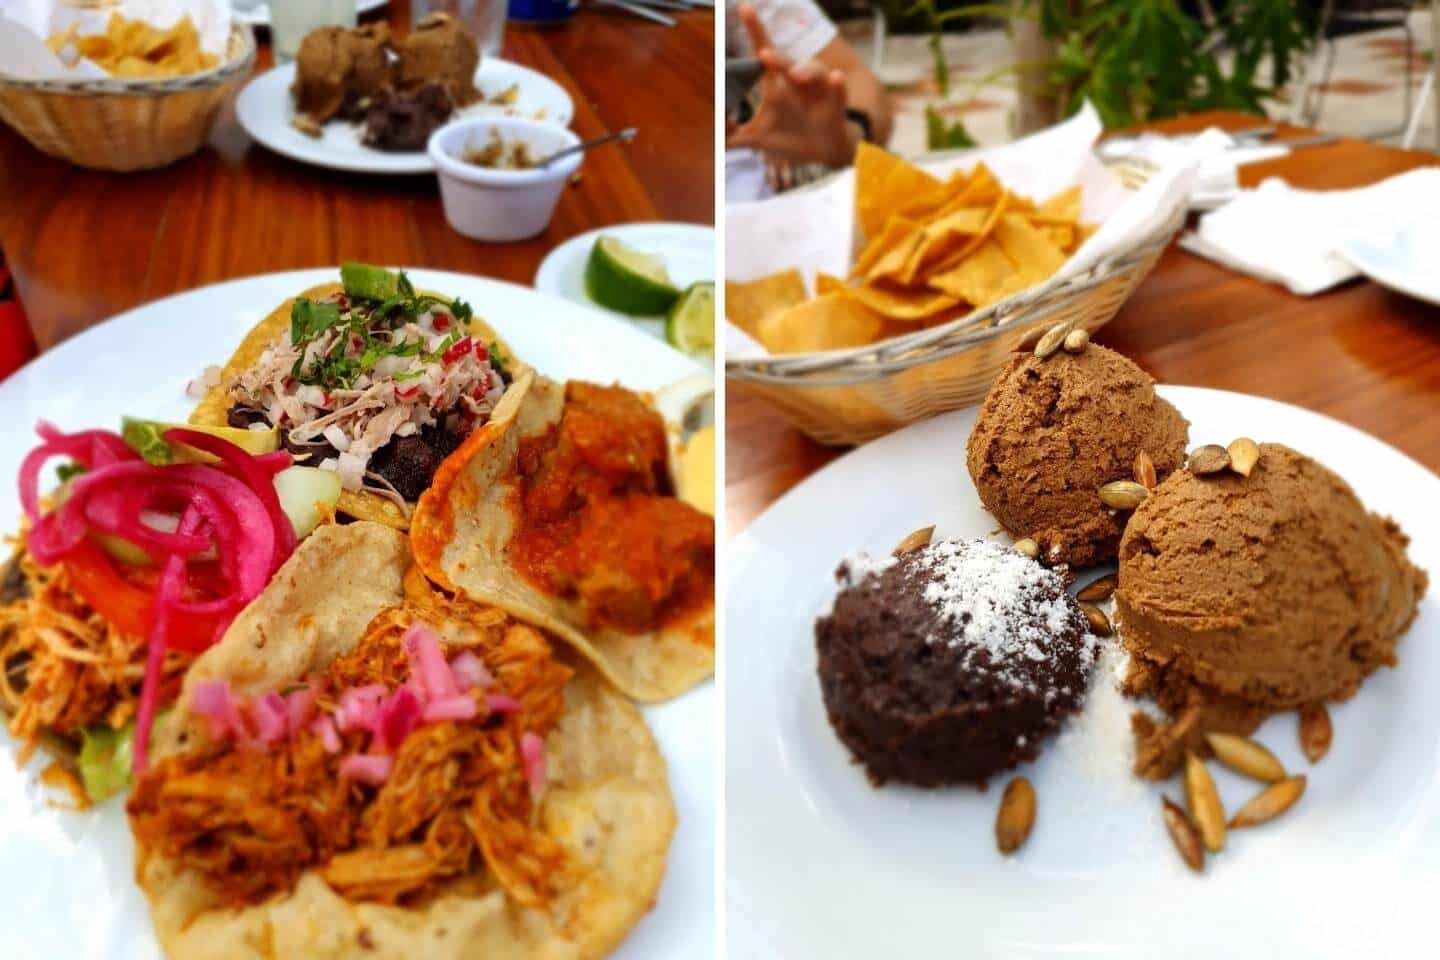 Yucatecan dishes